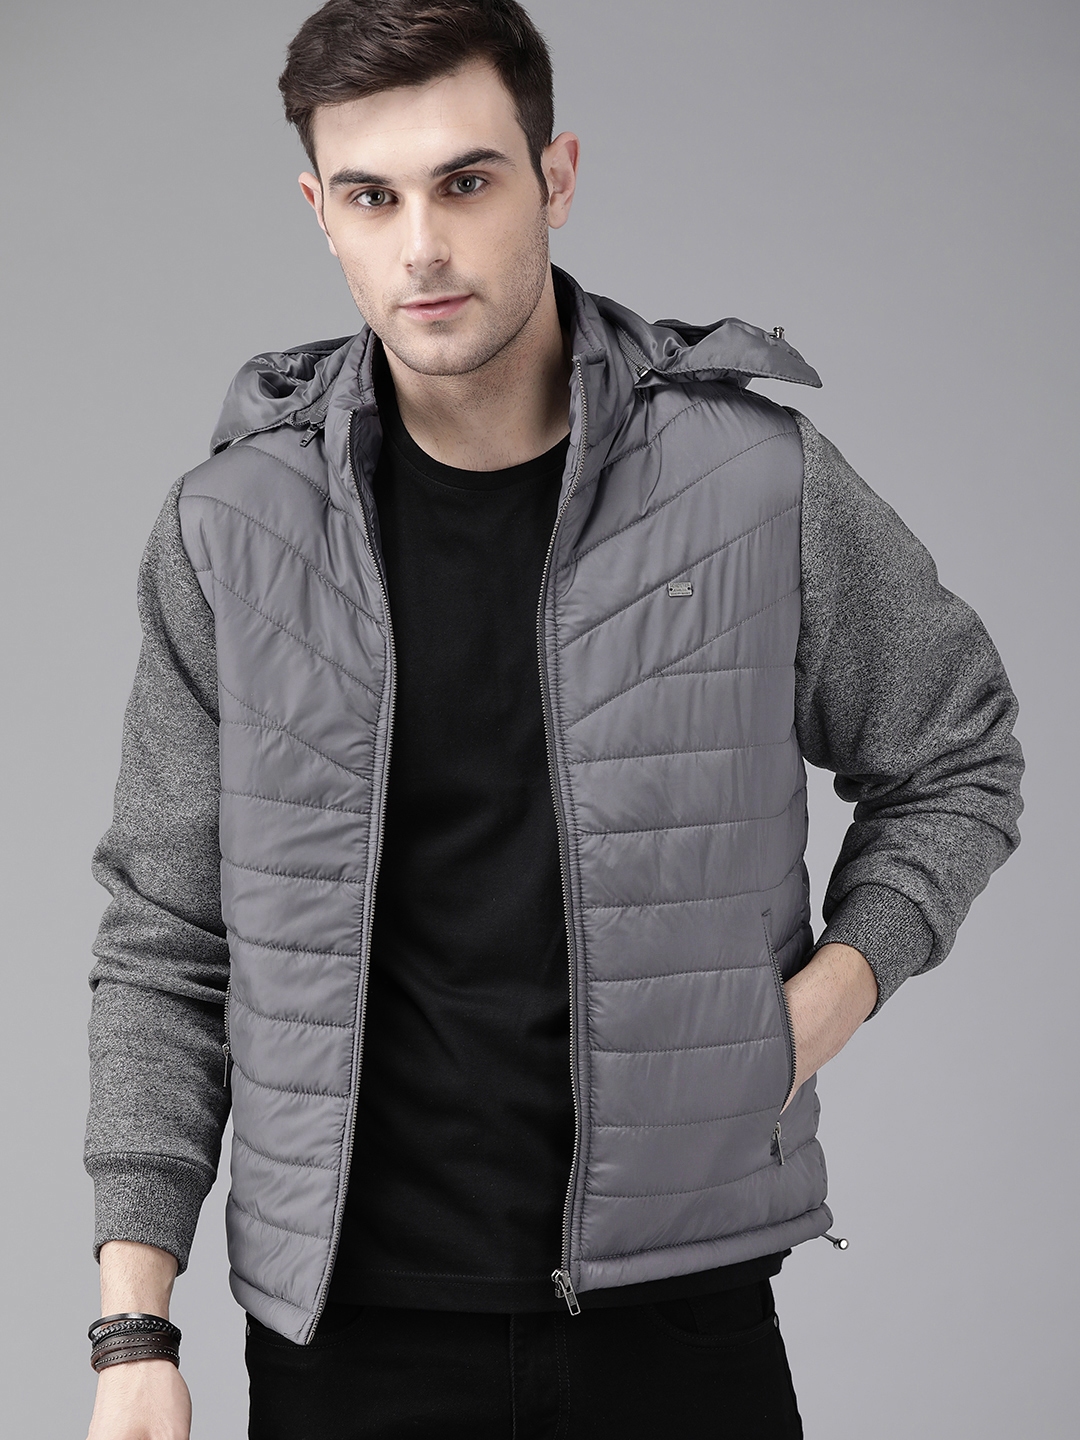 Buy The Roadster Lifestyle Co Men Grey Solid Puffer Hooded Jacket ...